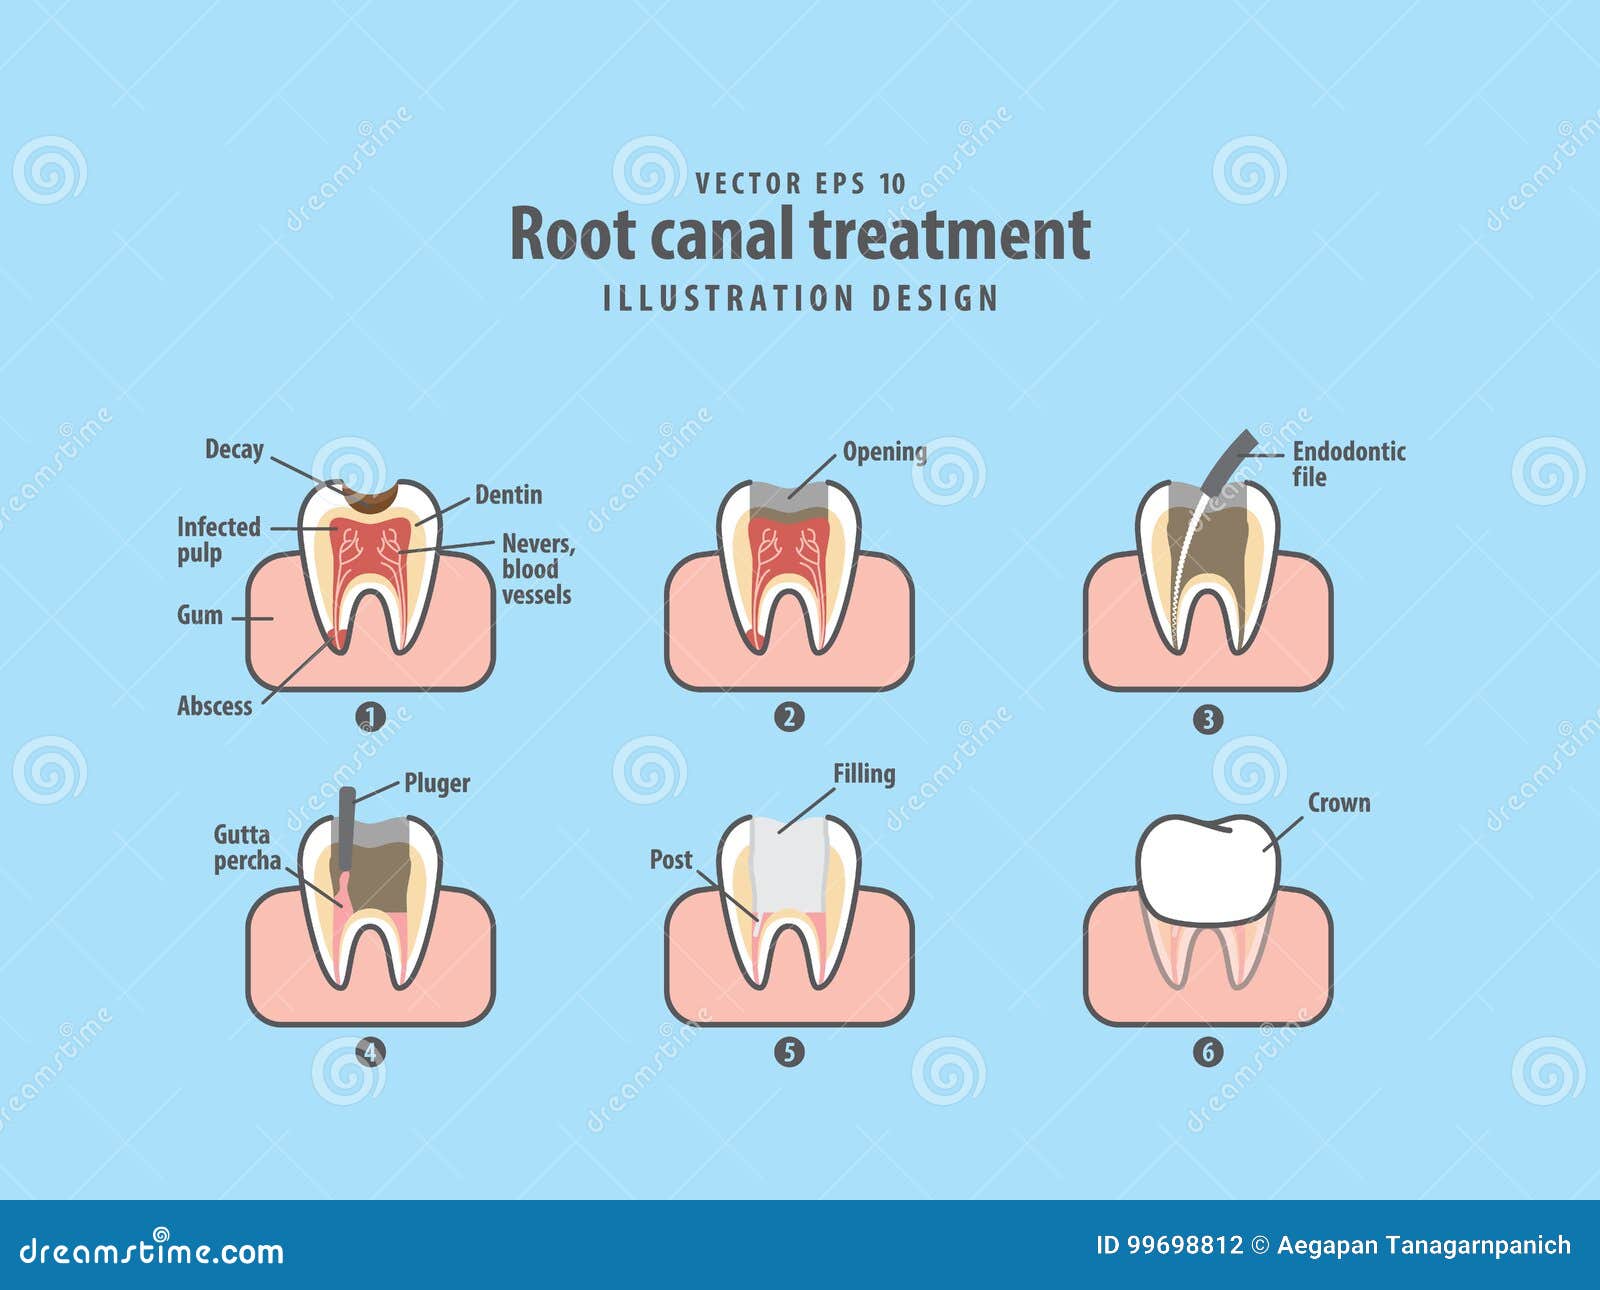 root canal treatment   on blue background.